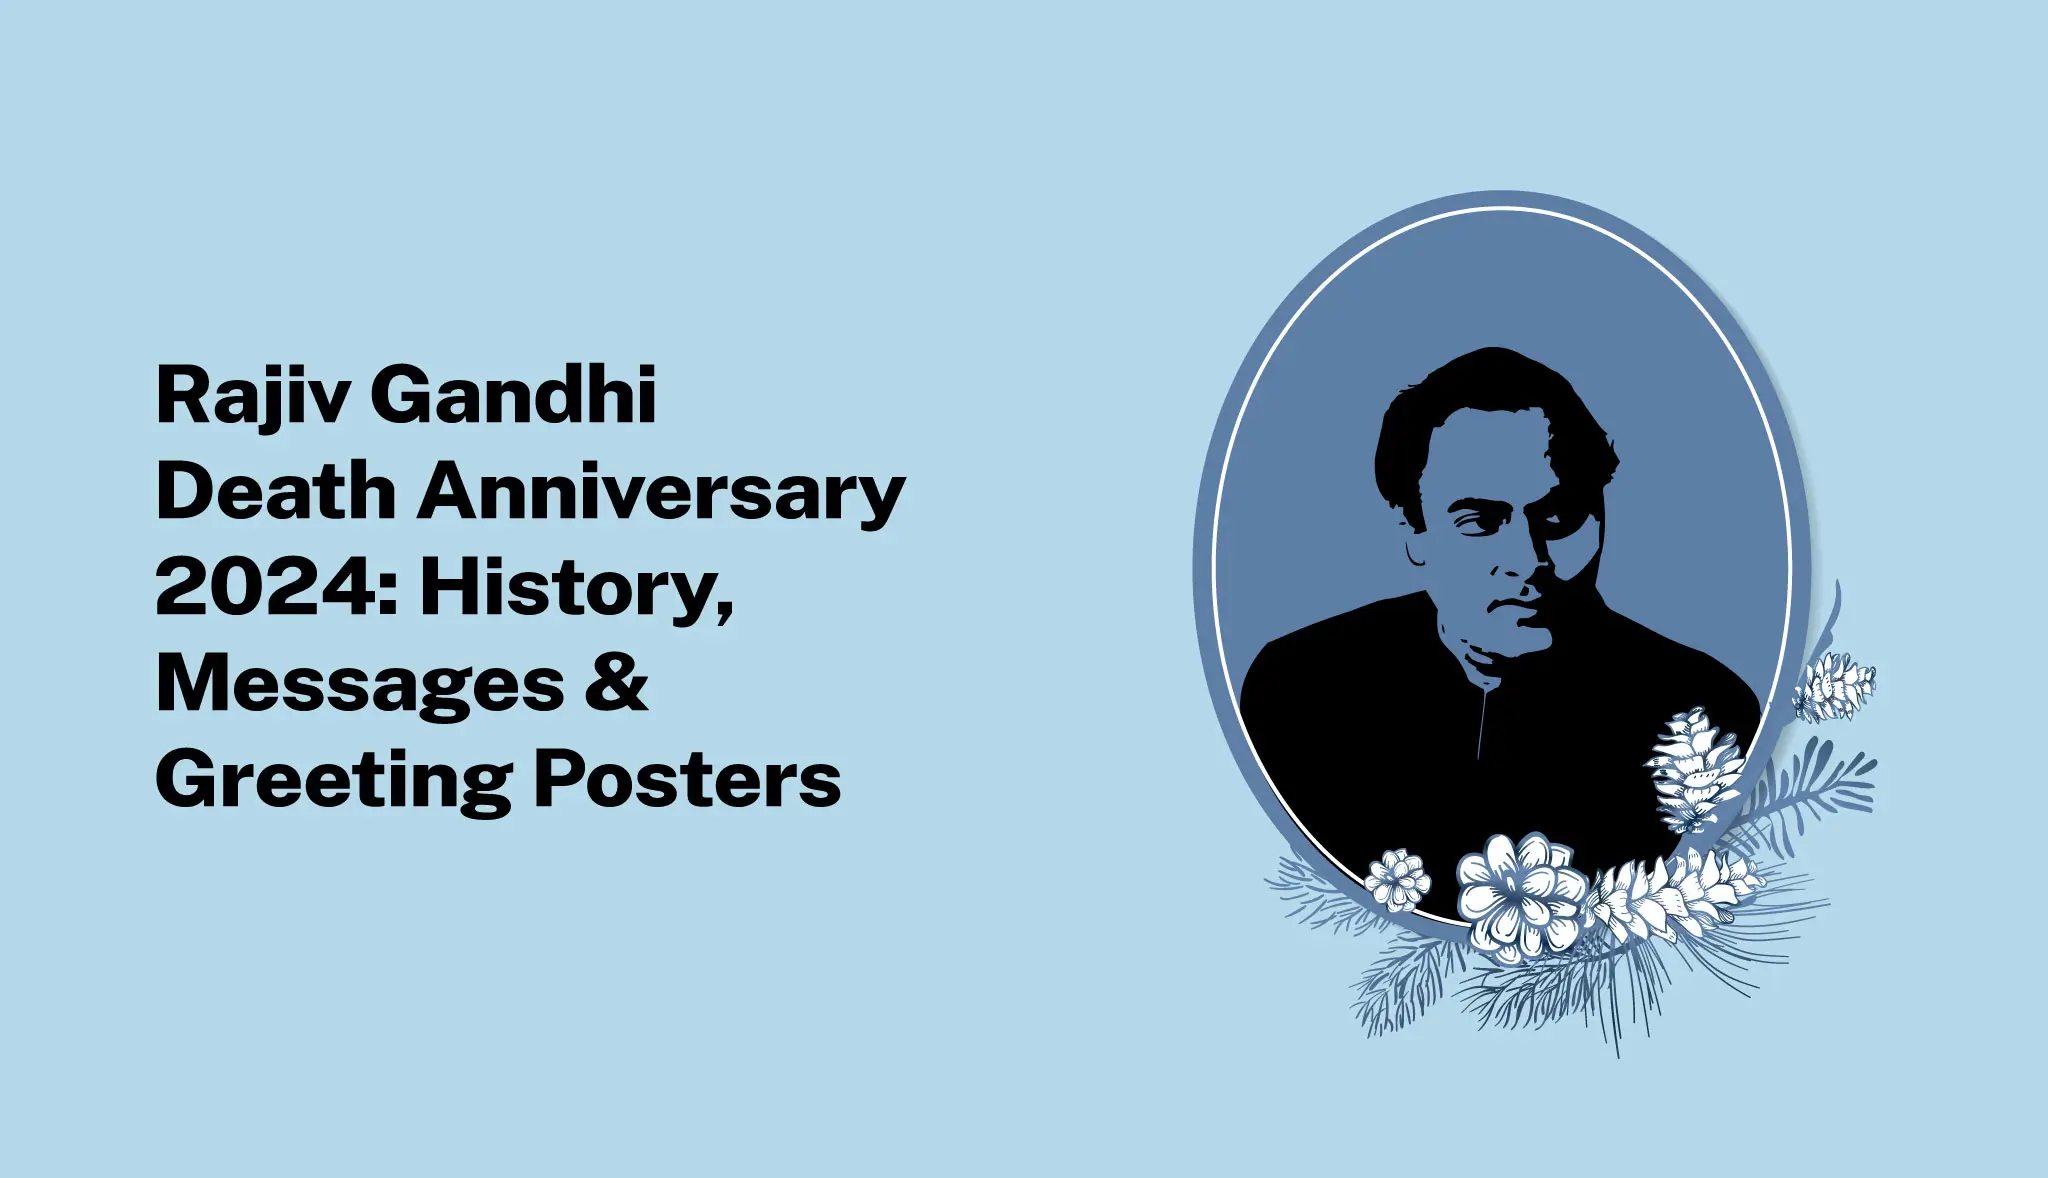 Rajiv Gandhi Death Anniversary 2024: History, Messages & Greeting Posters